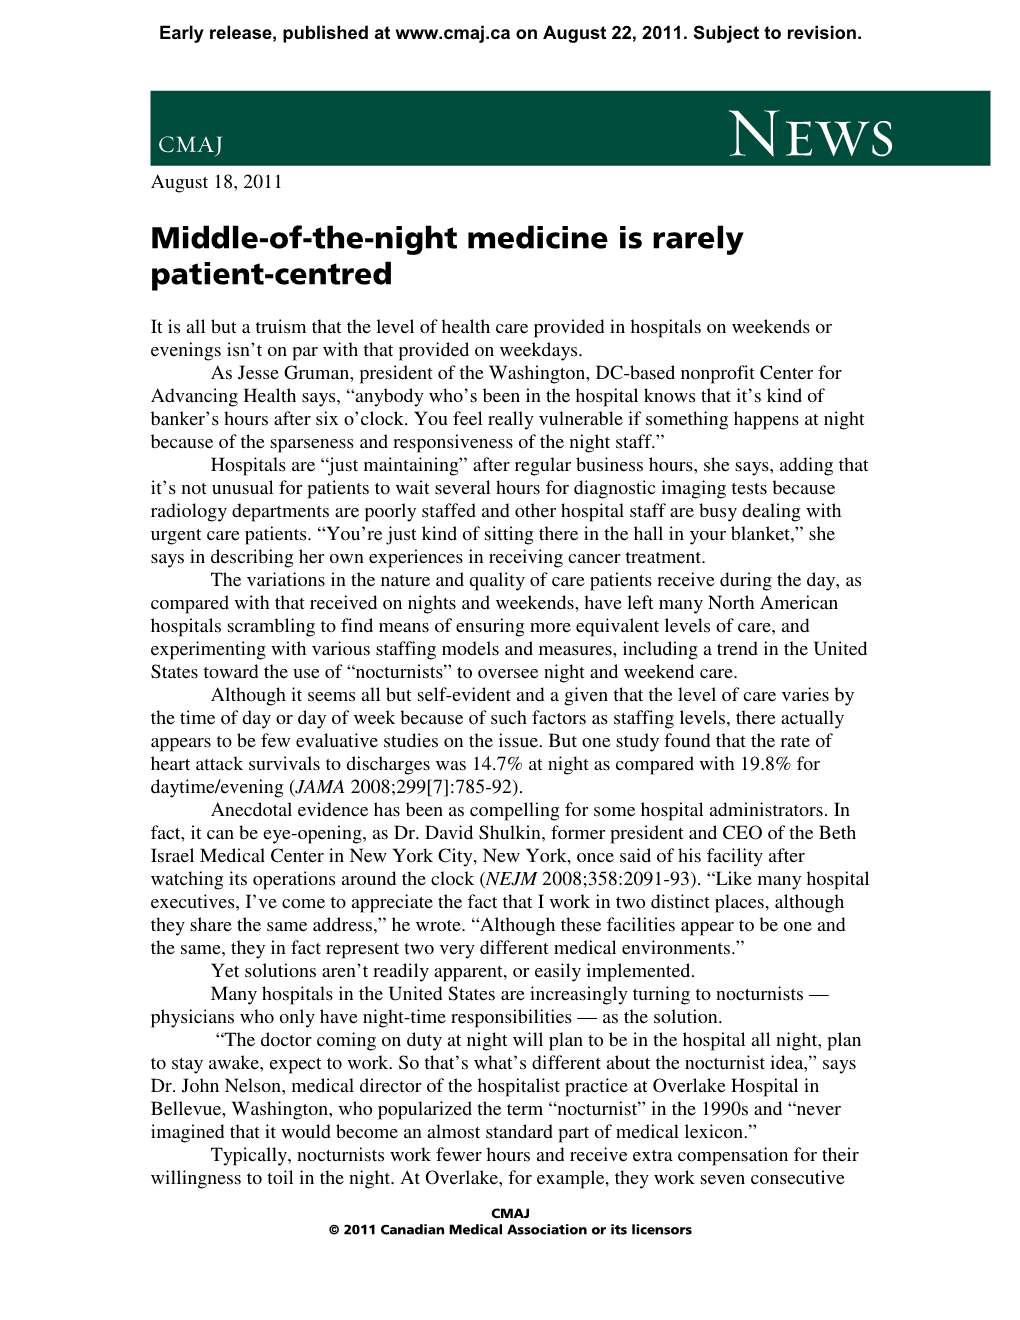 Middle-Of-The-Night Medicine Is Rarely Patient-Centred